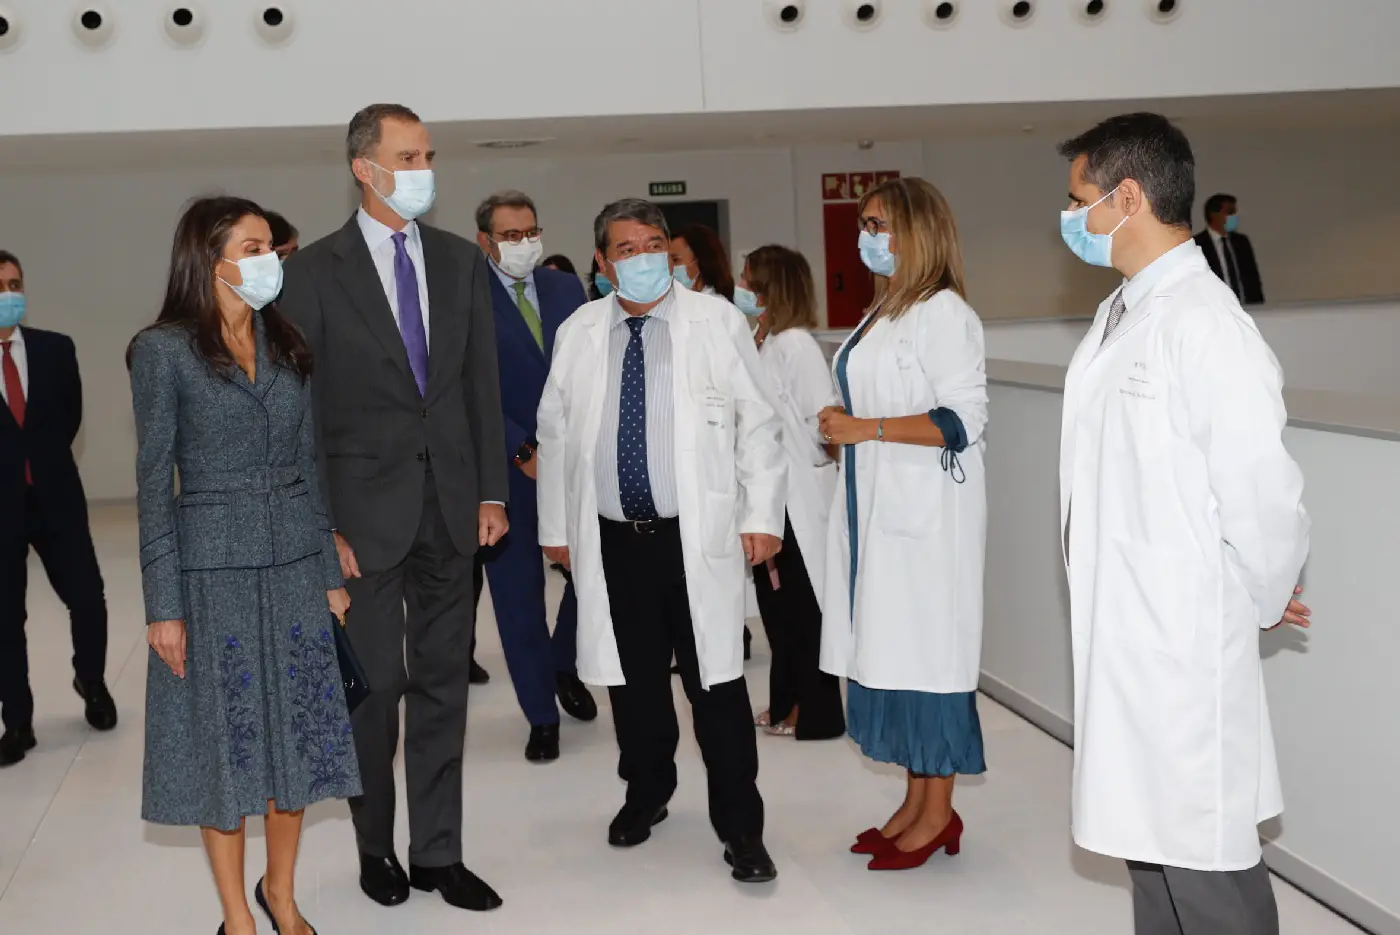 King Felipe and Queen Letizia met with the staff at the new Toledo University Hospital